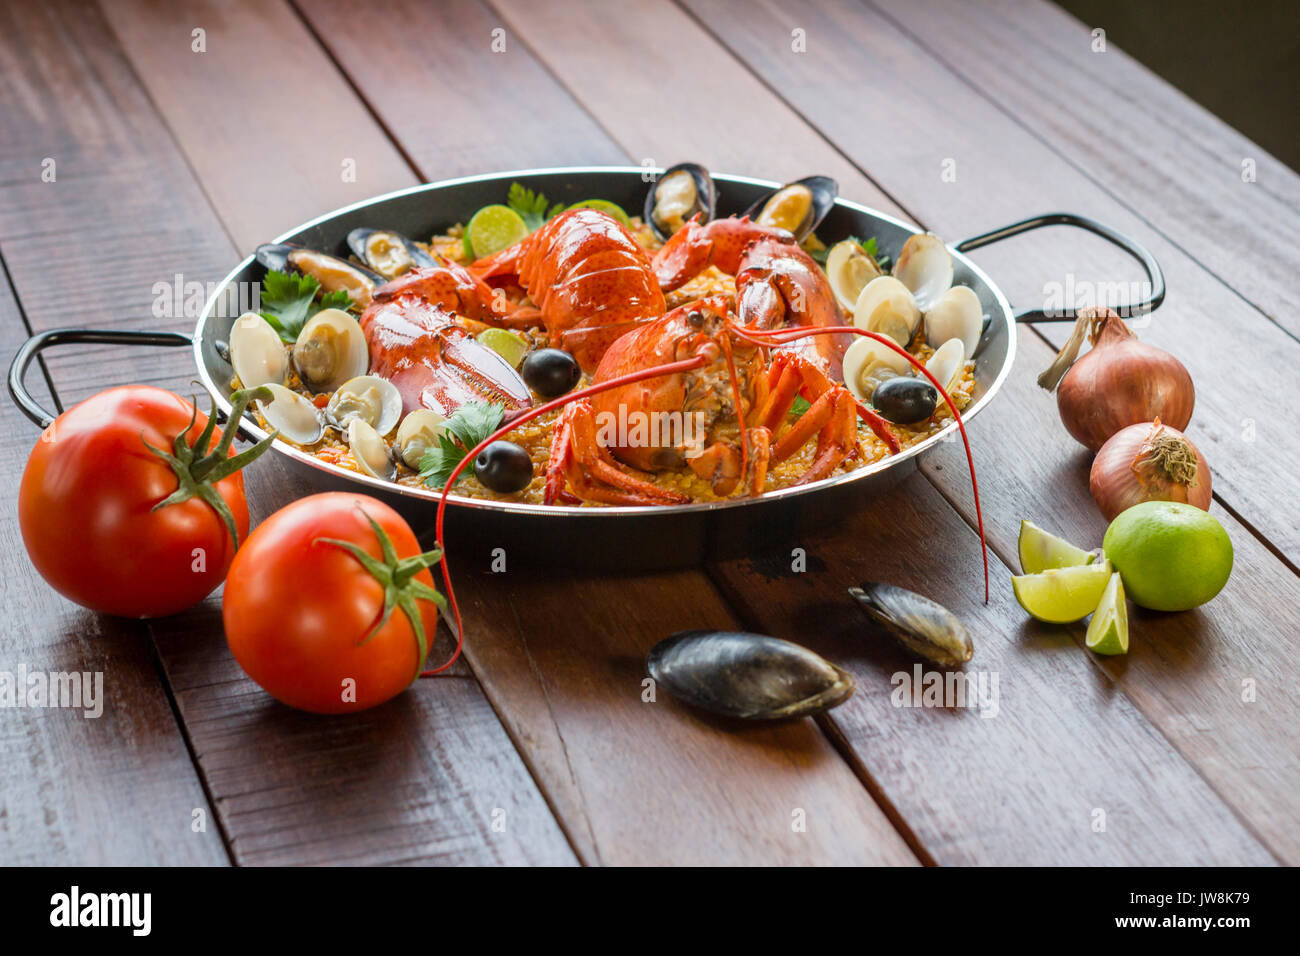 Gourmet seafood Valencia paella with fresh langoustine, clams, mussels and squid on savory saffron rice with peas and lemon slices, close up view Stock Photo